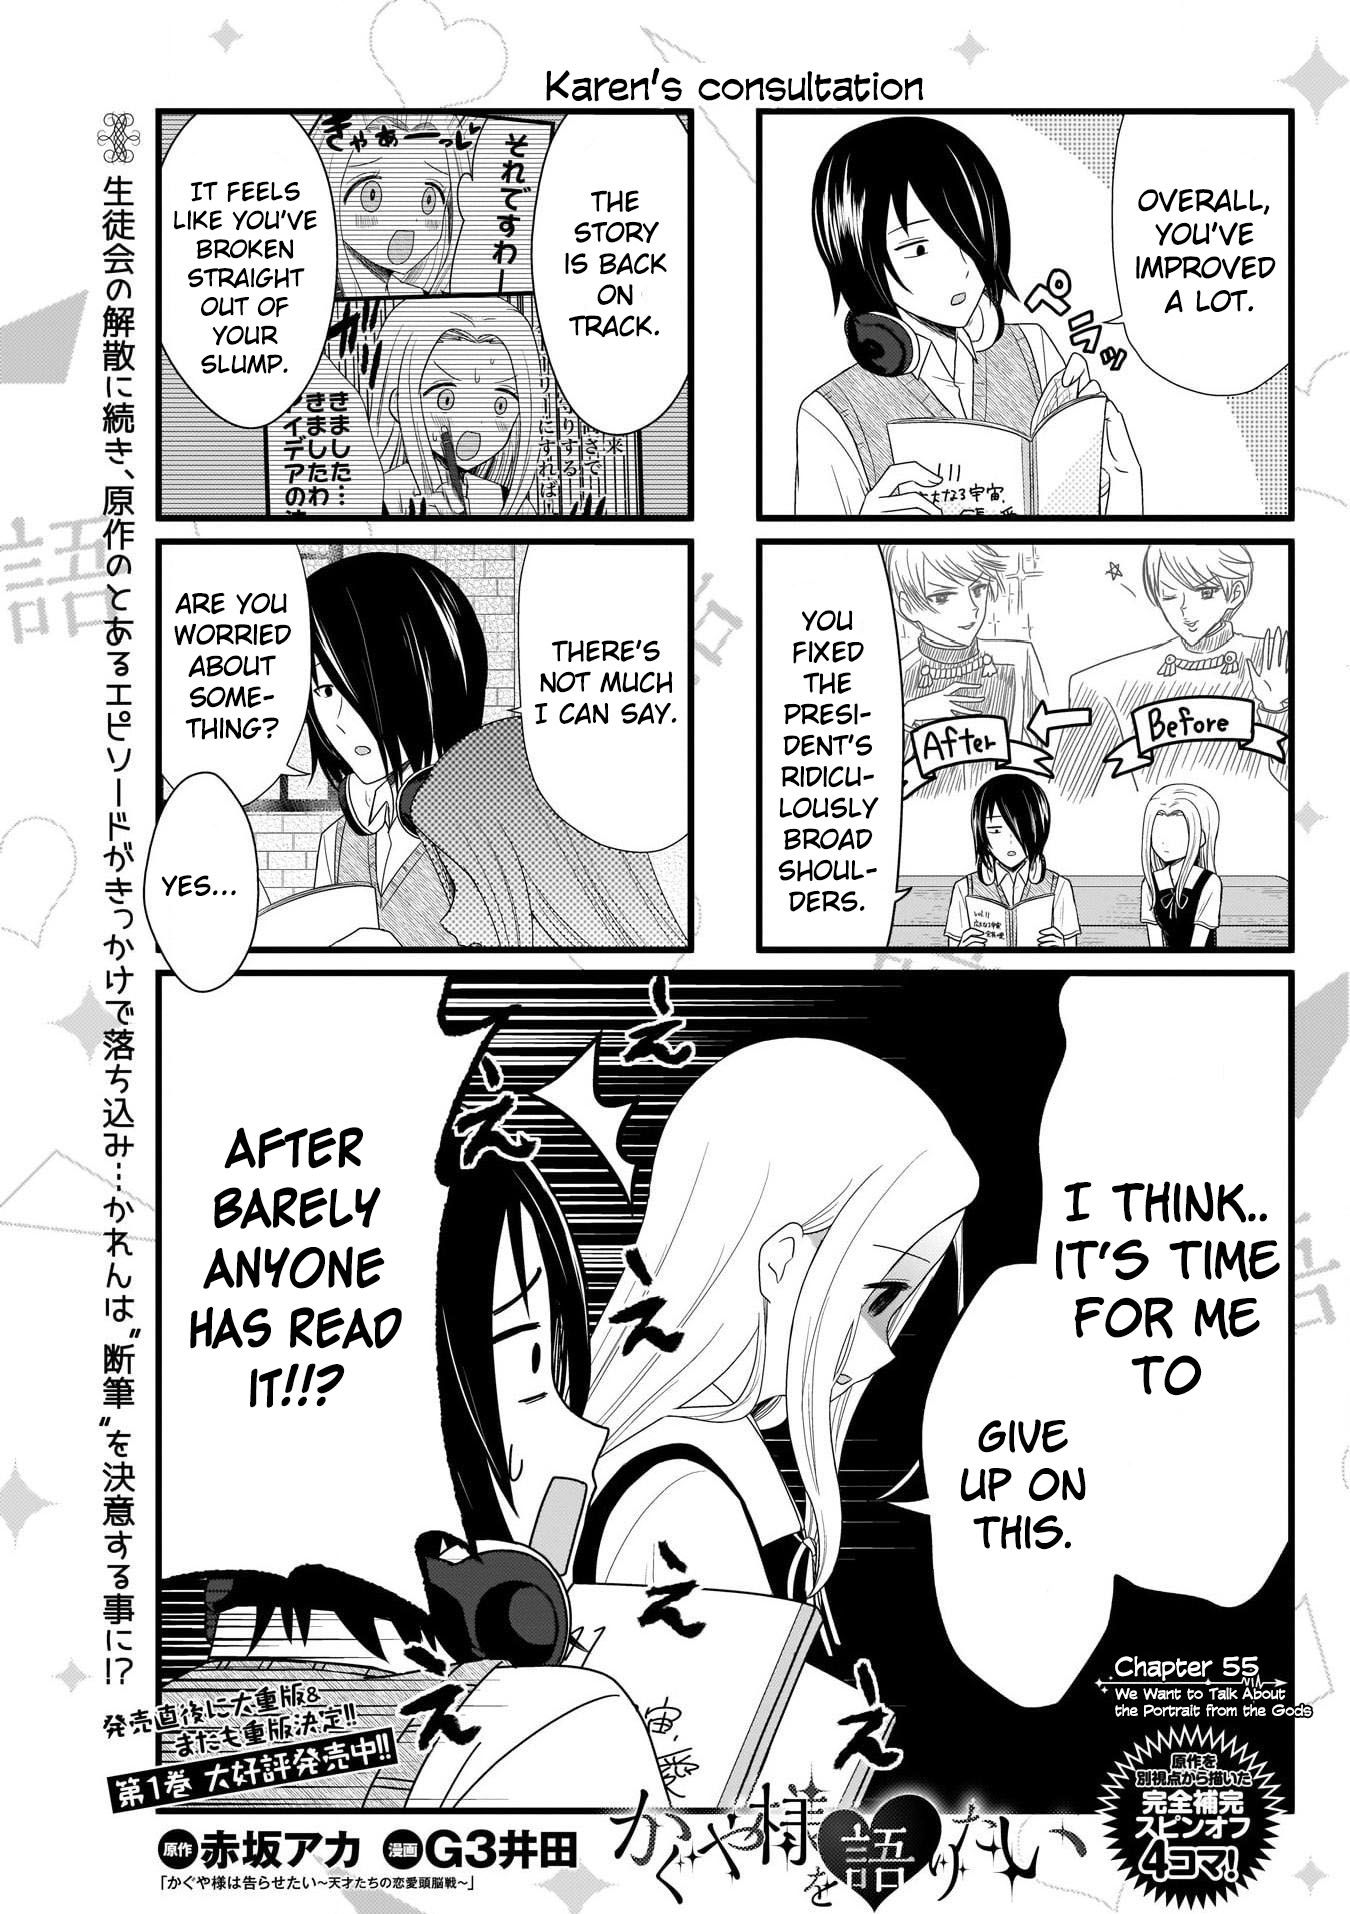 we_want_to_talk_about_kaguya_55_1